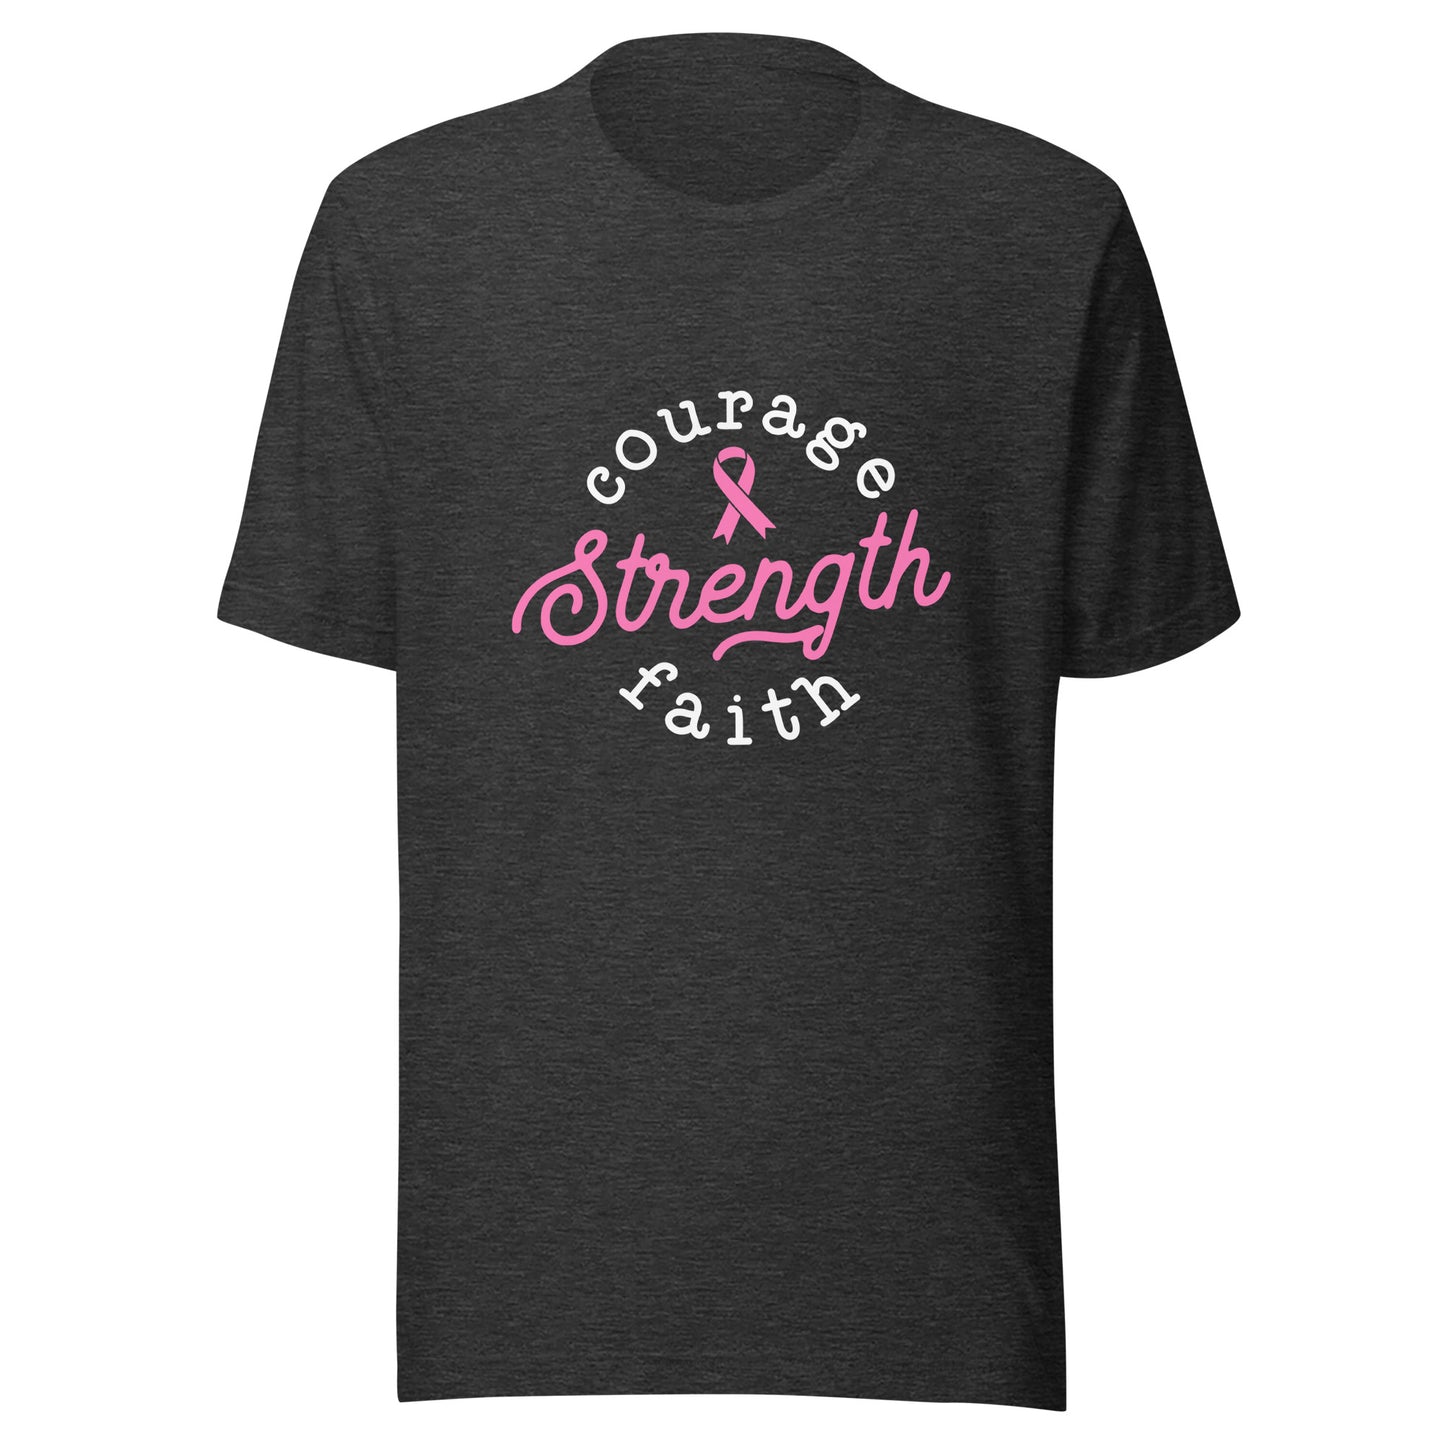 Courage Strength Faith Breast Cancer Support - Survivor - Awareness Pink Ribbon Black Font Unisex T-shirt